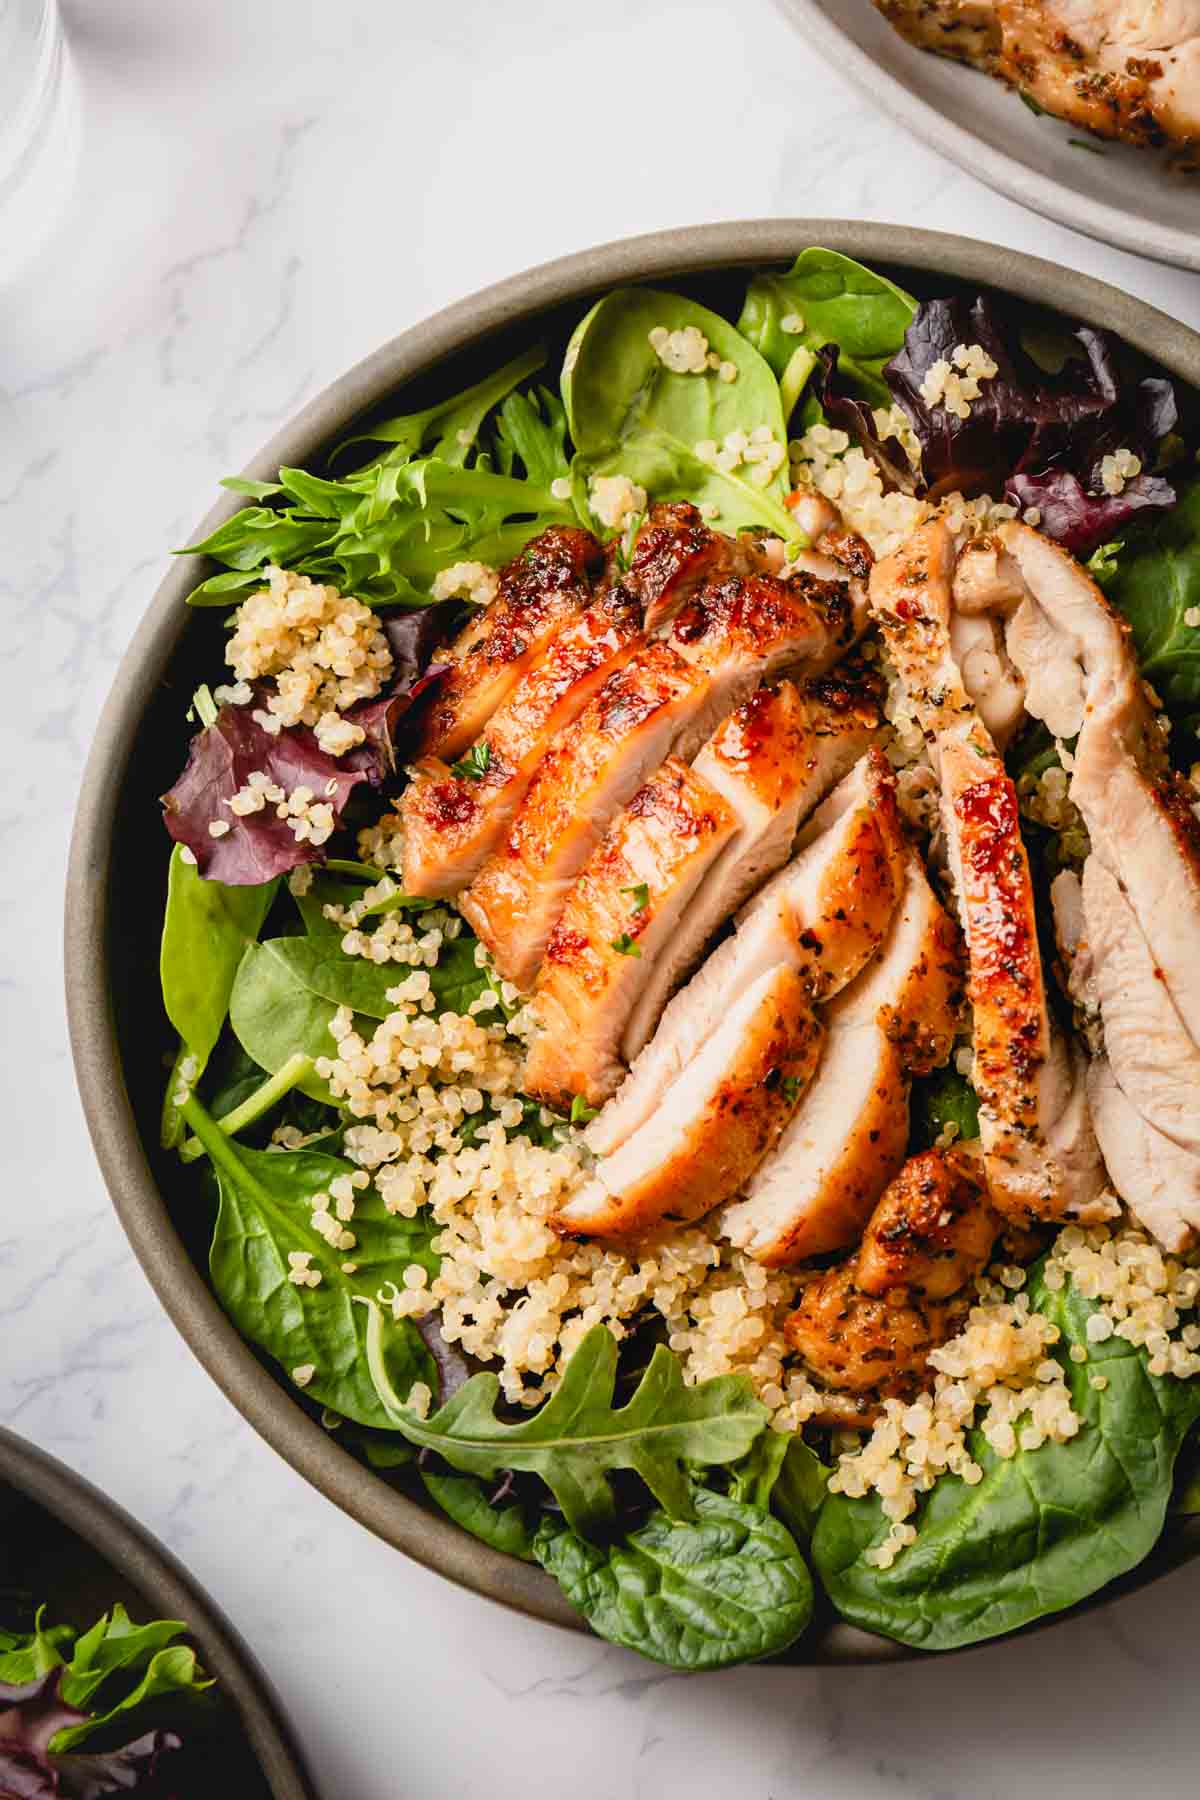 Green salad topped with quinoa and sliced chicken thighs.